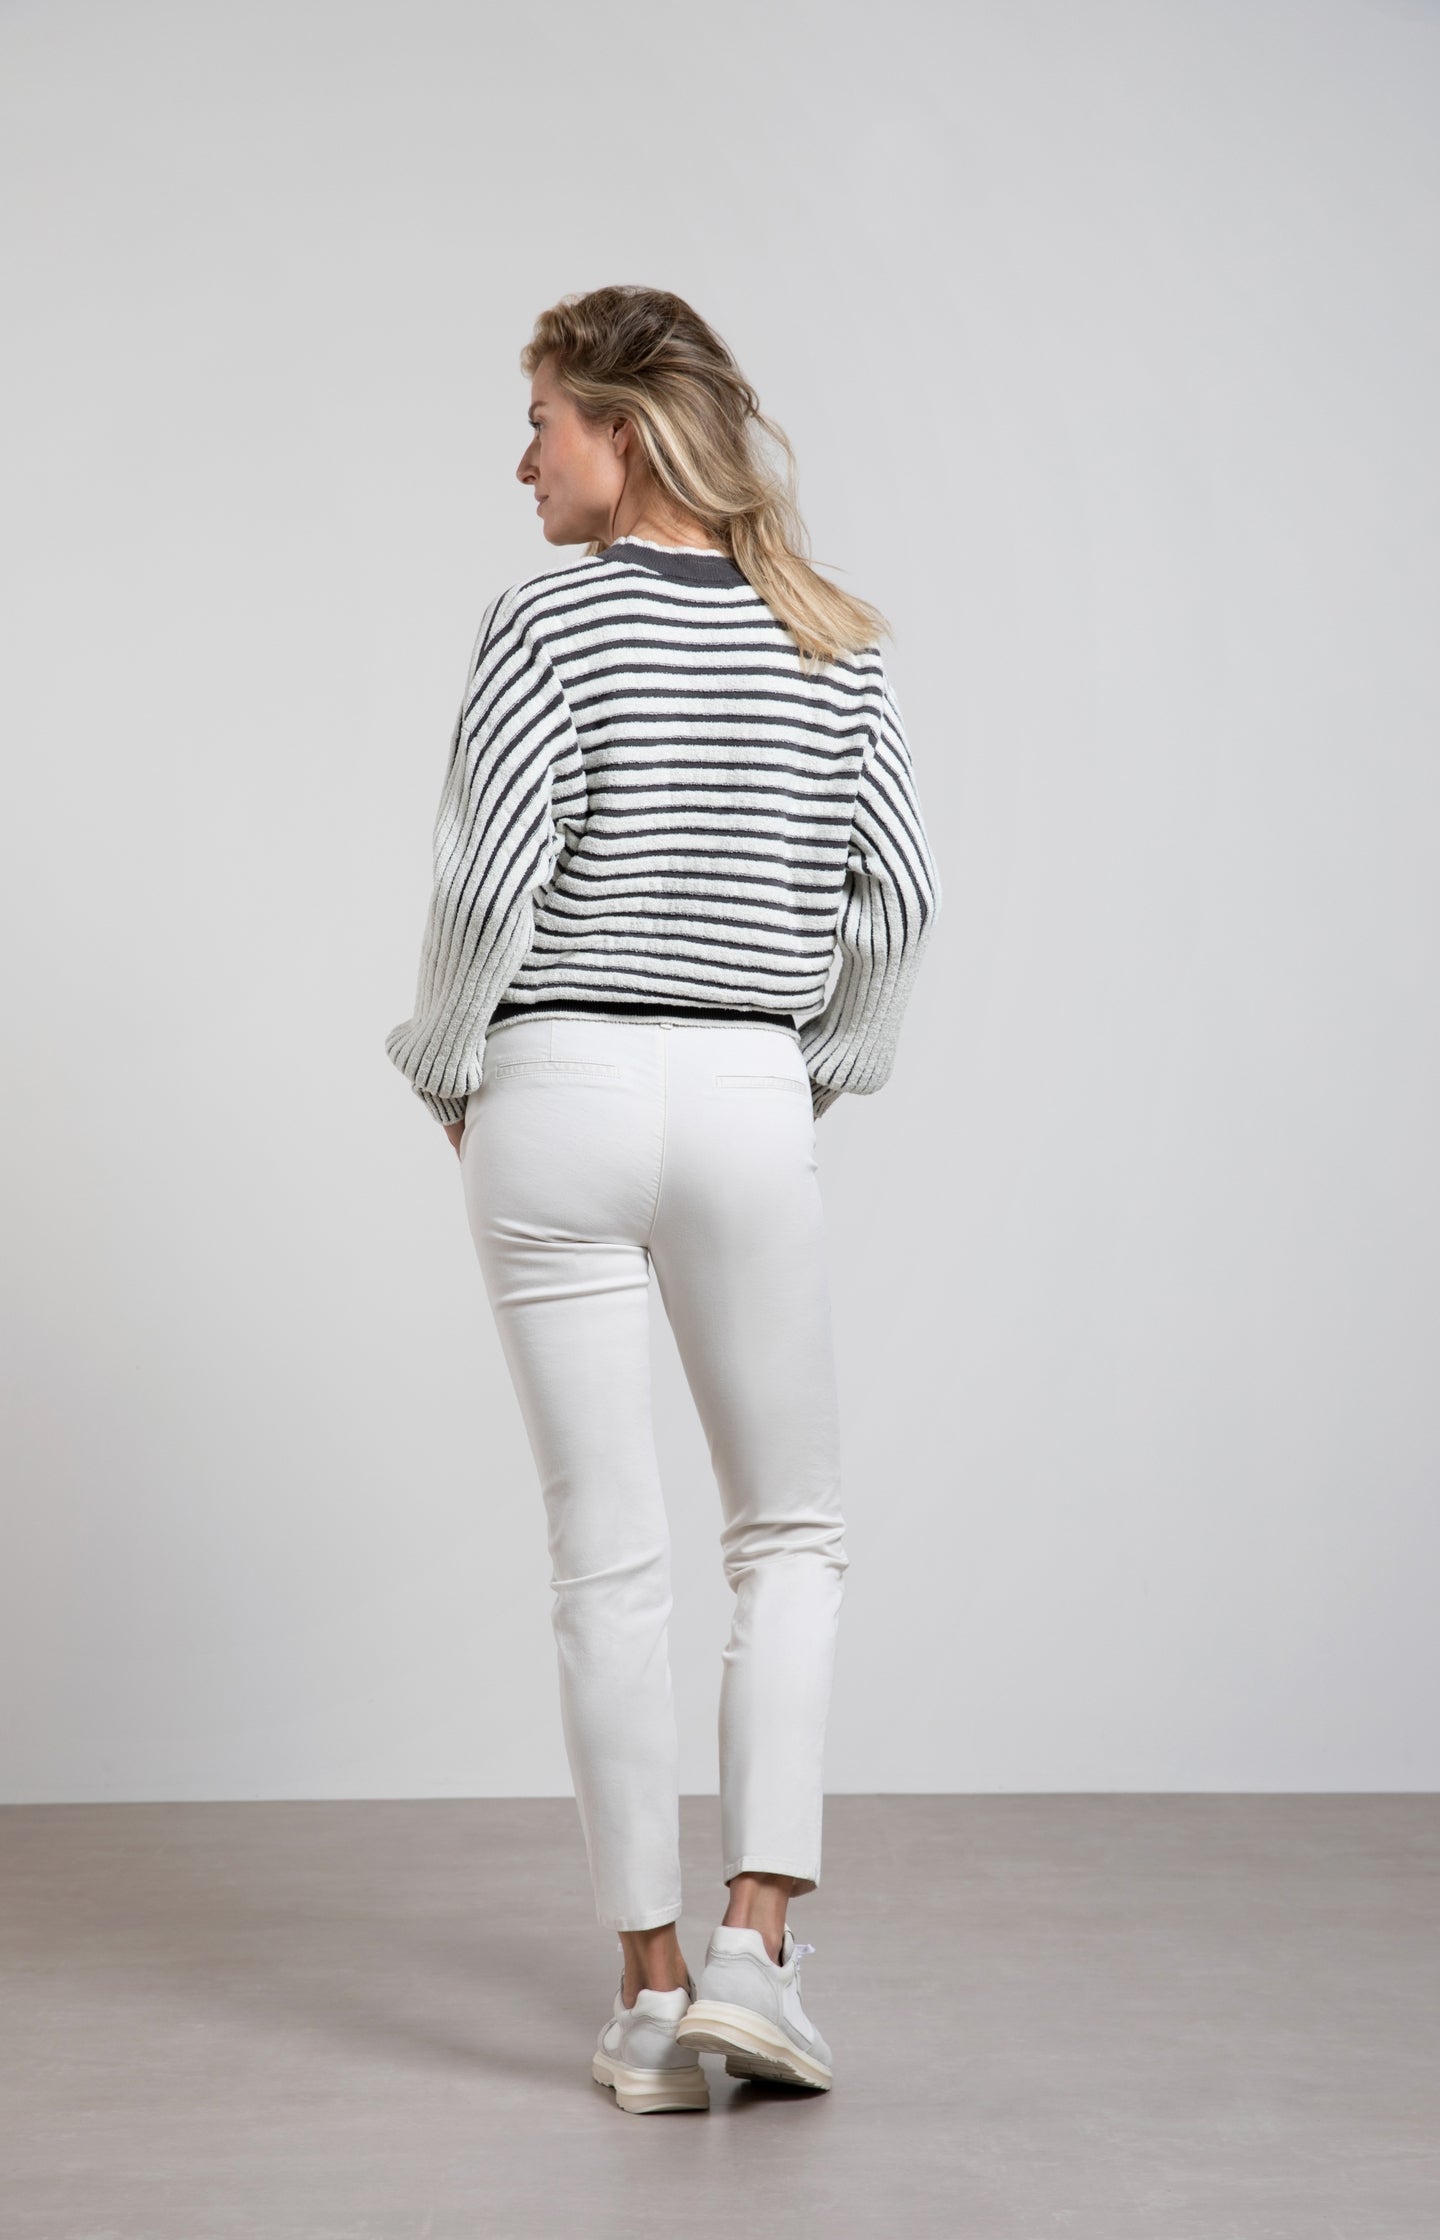 Striped sweater with crewneck, long sleeves and frayed seams